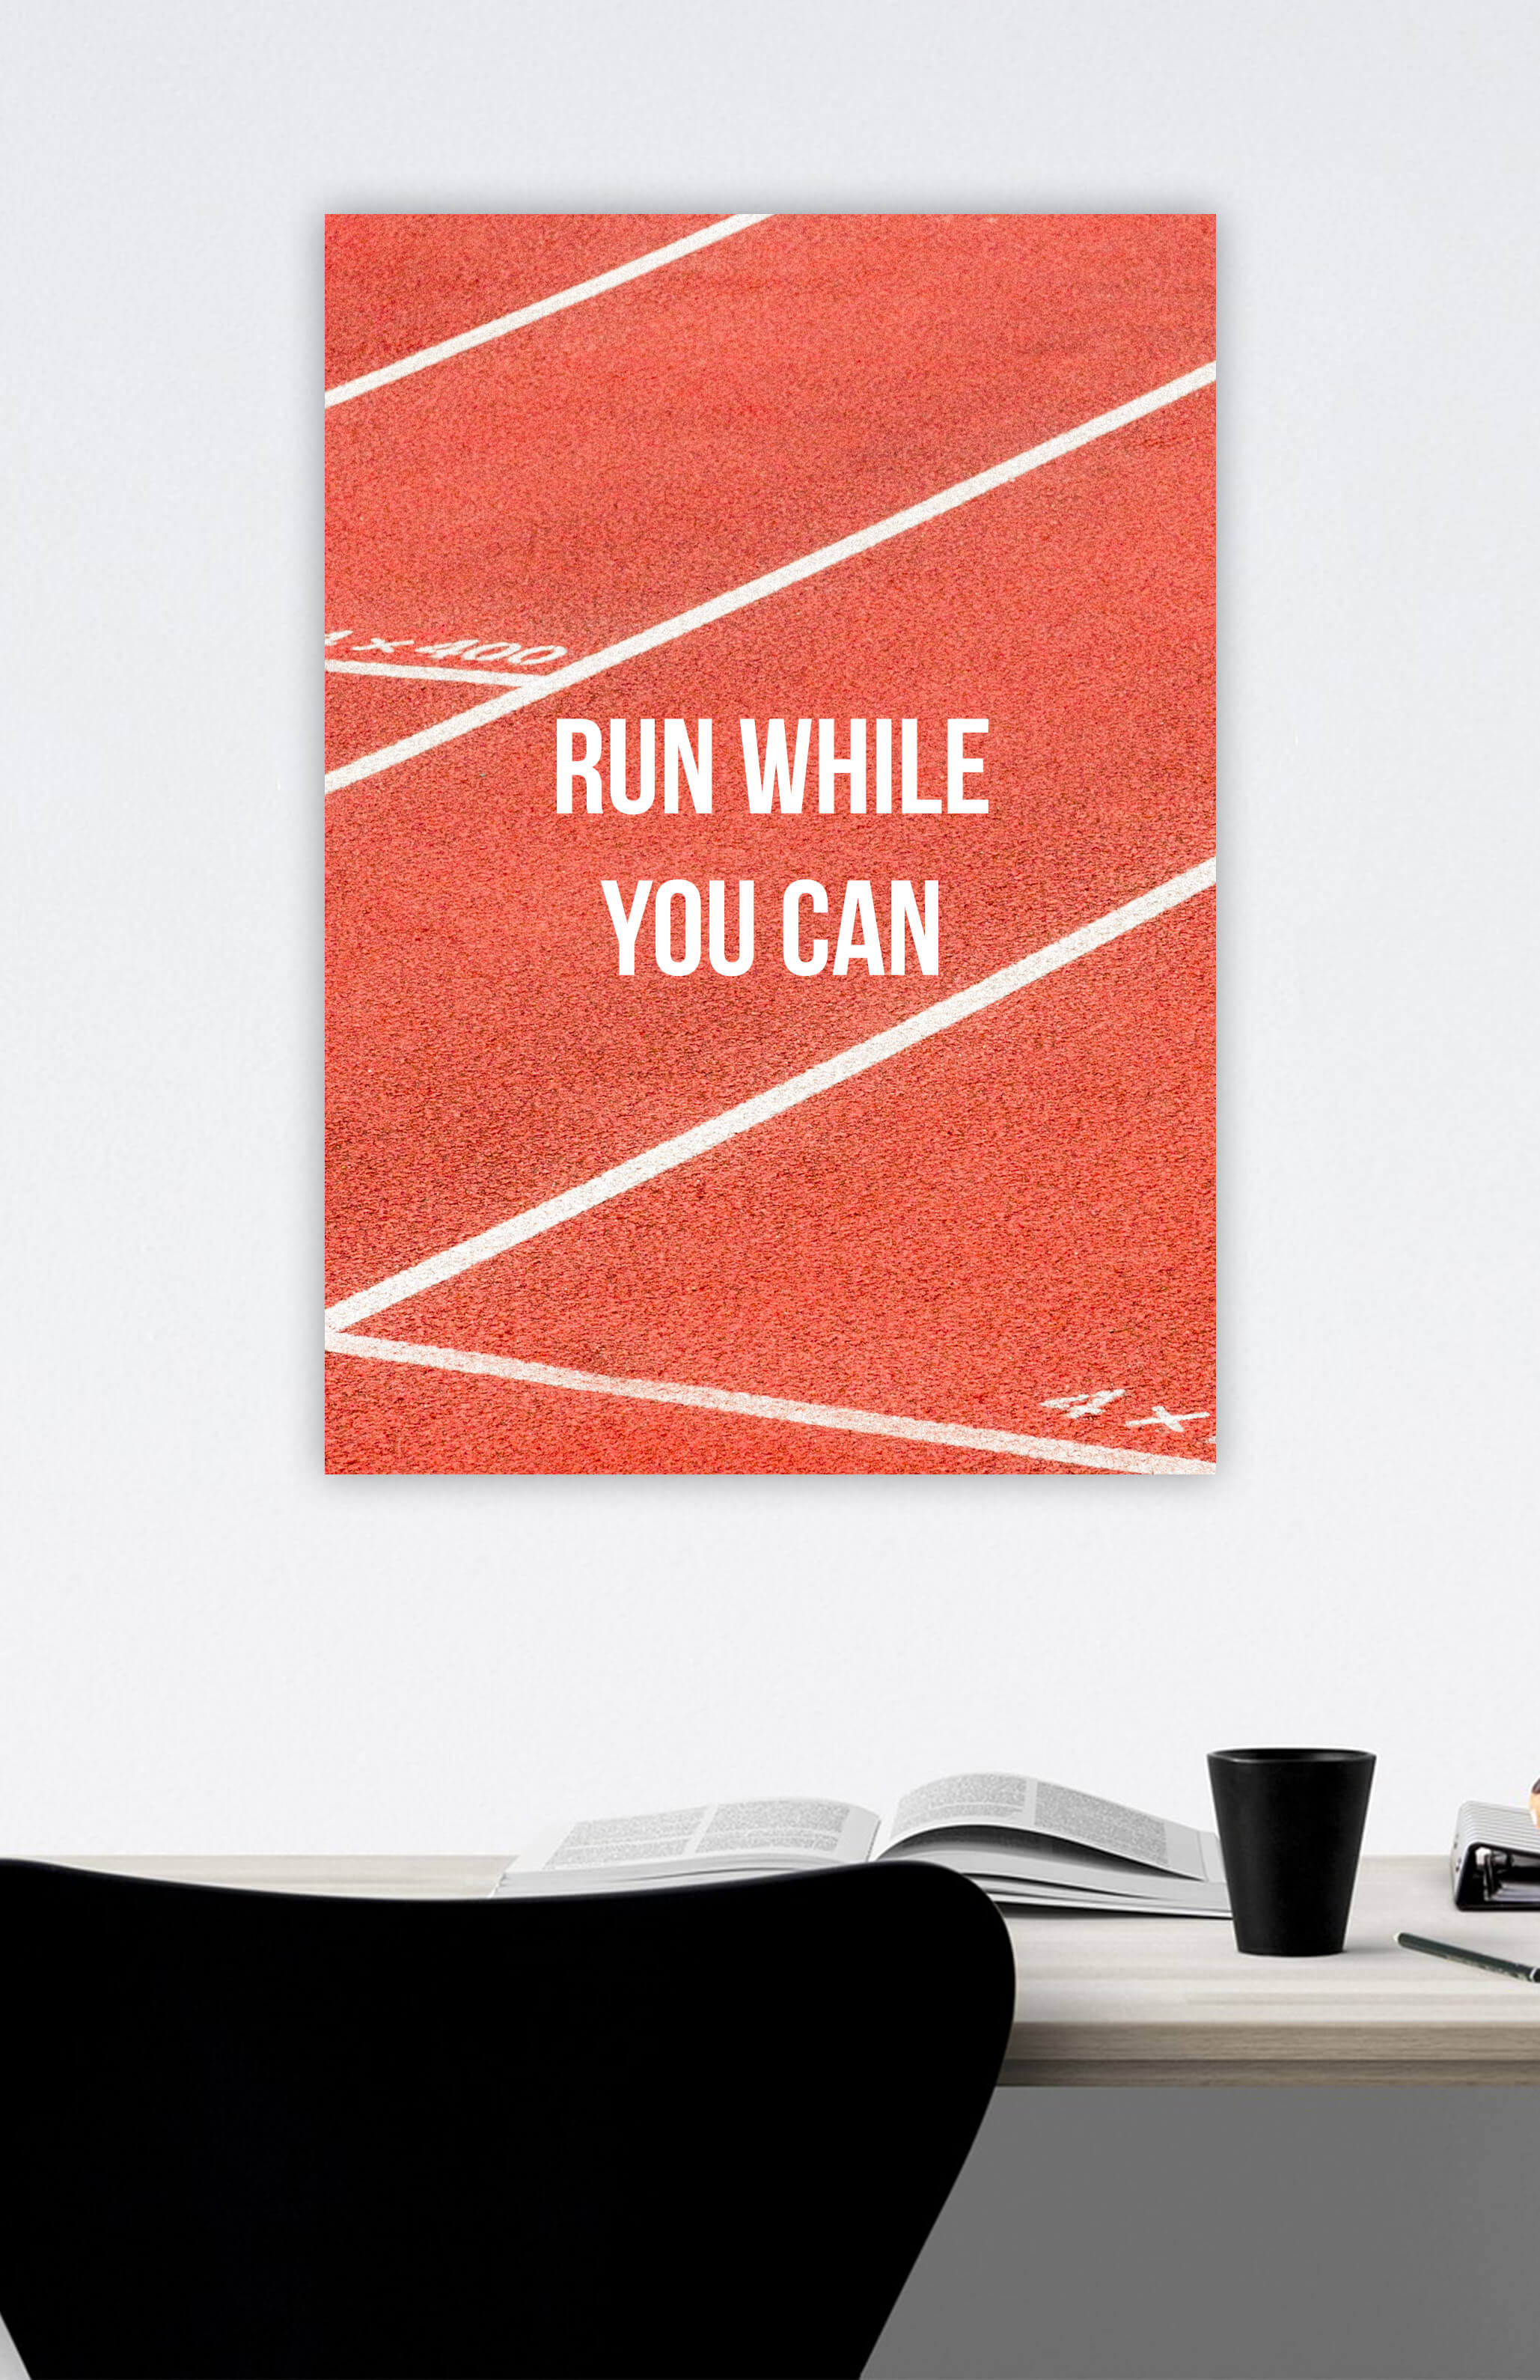 V3 Apparel womens Run While You Can, Motivational posters, mens inspirational wall artwork and empowering poster quote designs for office, home gym, school, kitchen and living room.